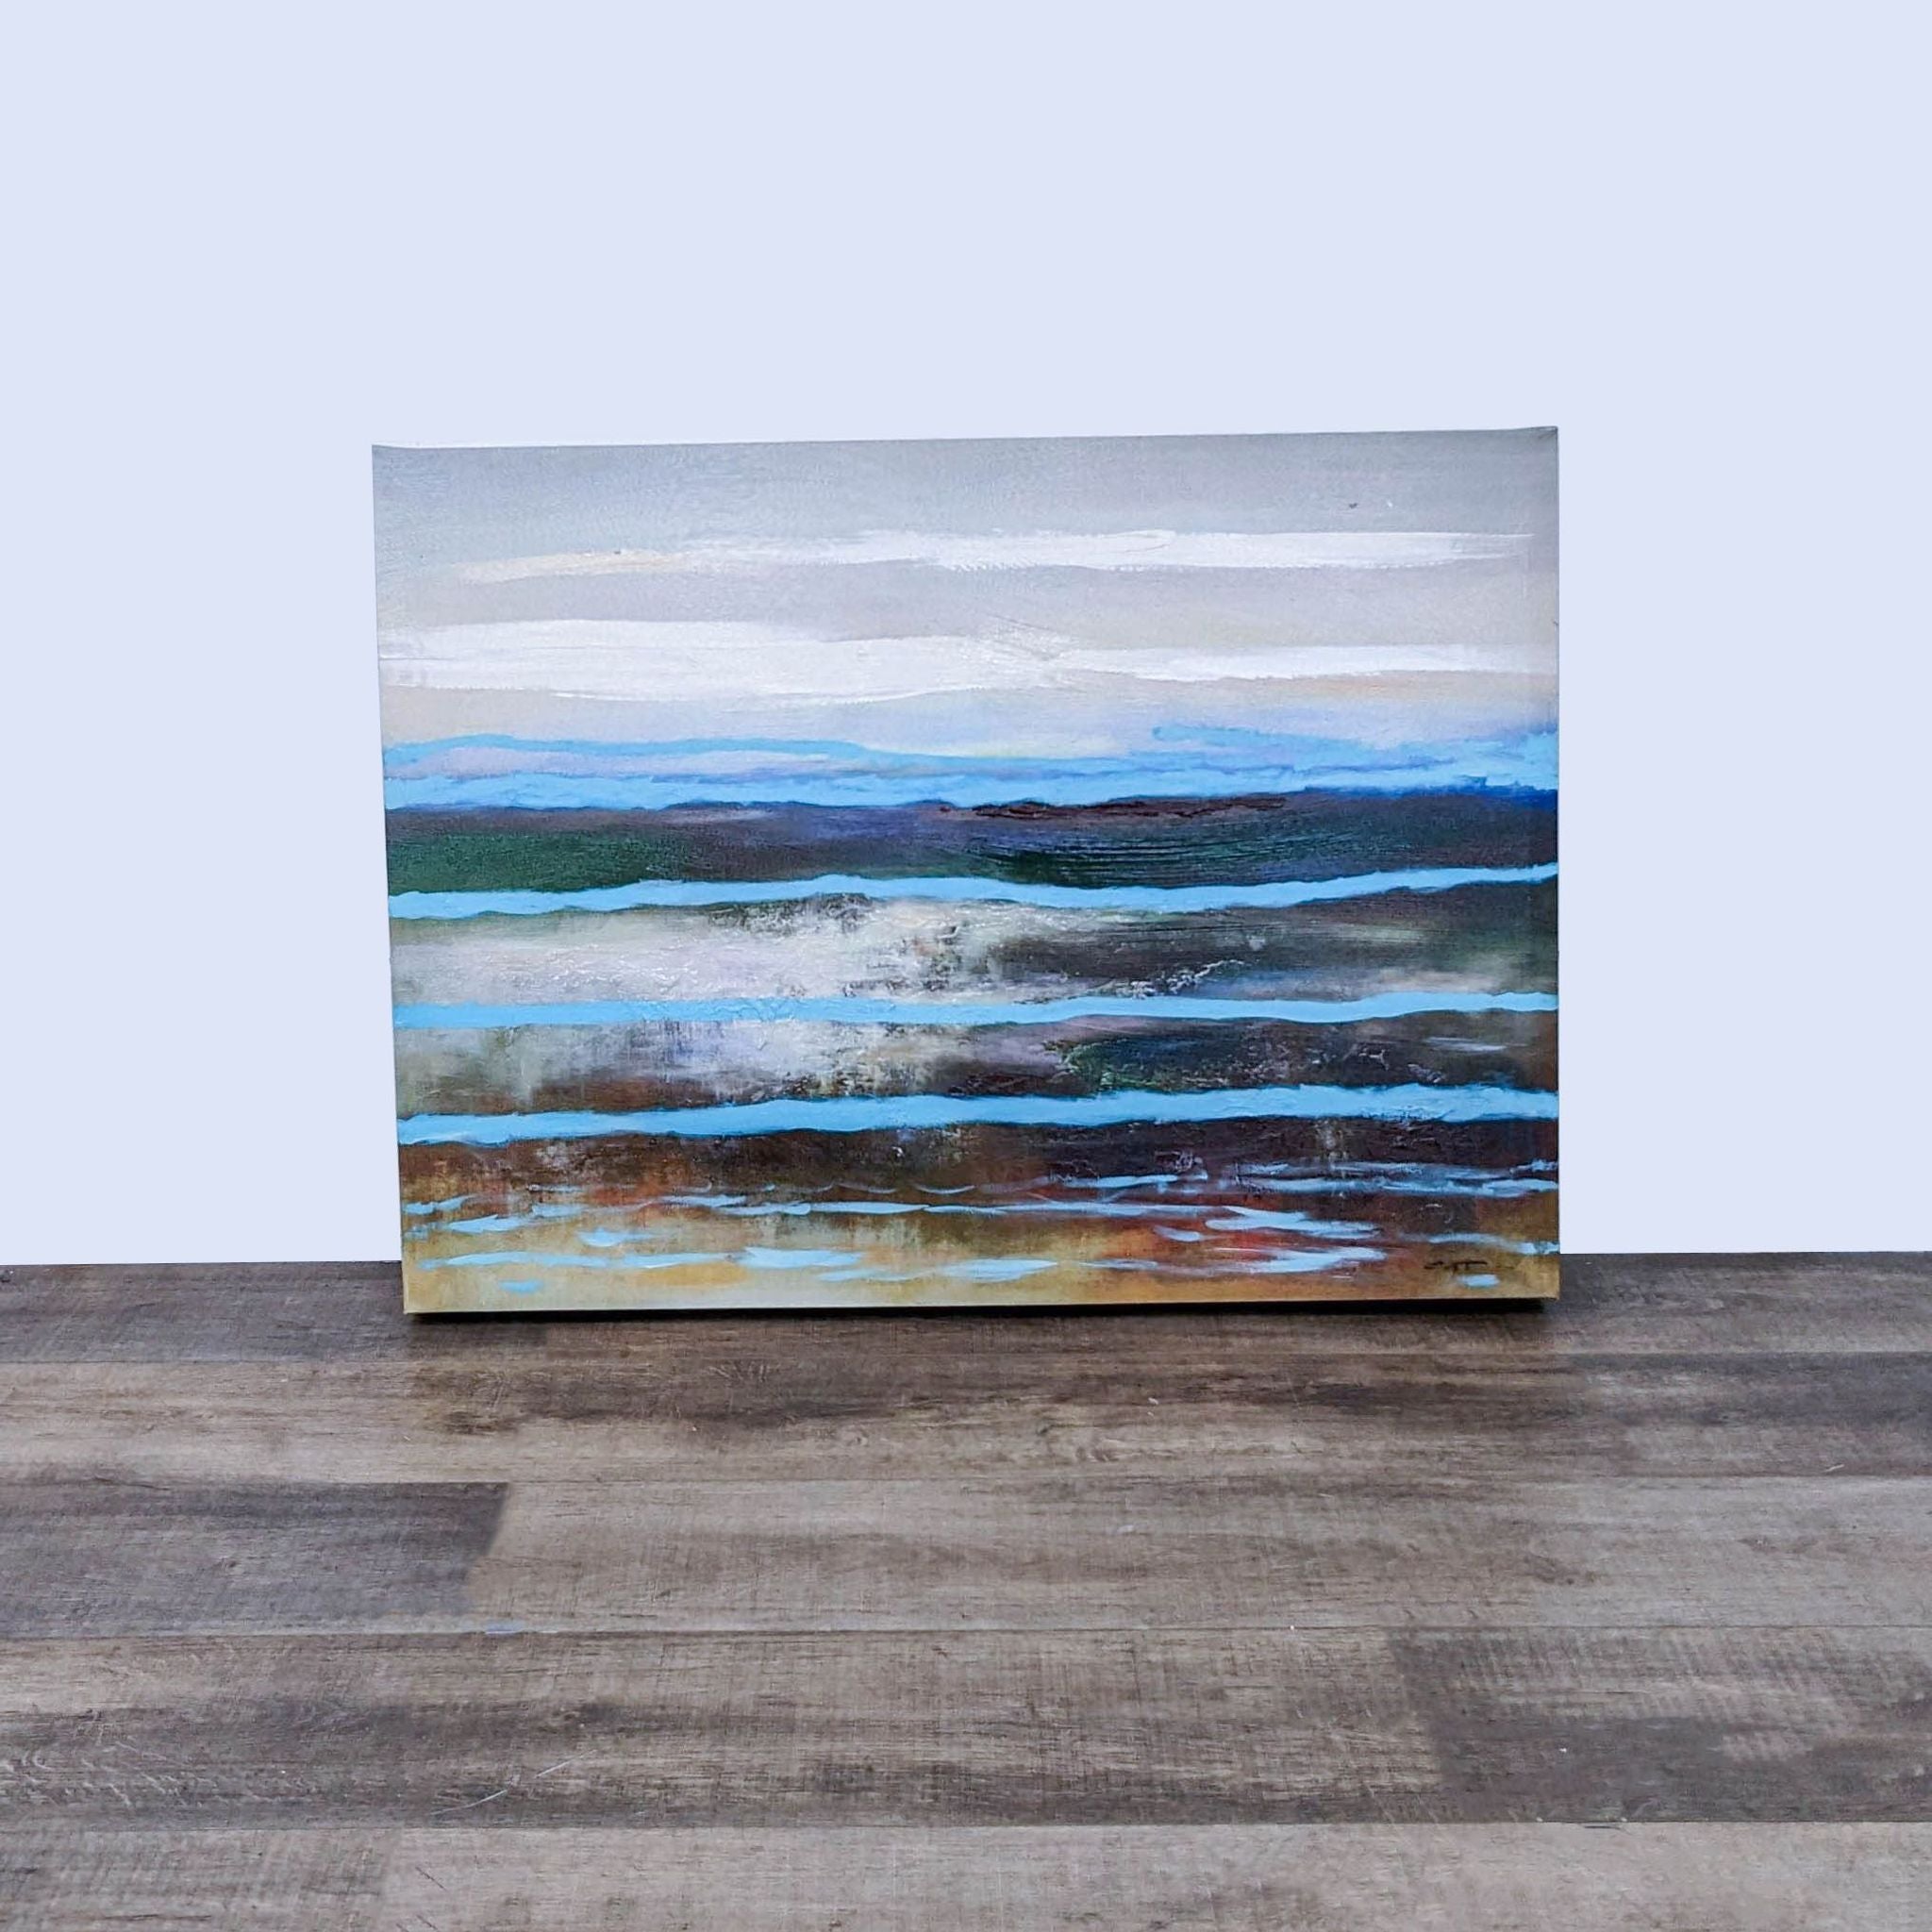 Alt text 1: Giclee print of abstract modern landscape with stylized water and cloud motifs, displayed on wooden floor.